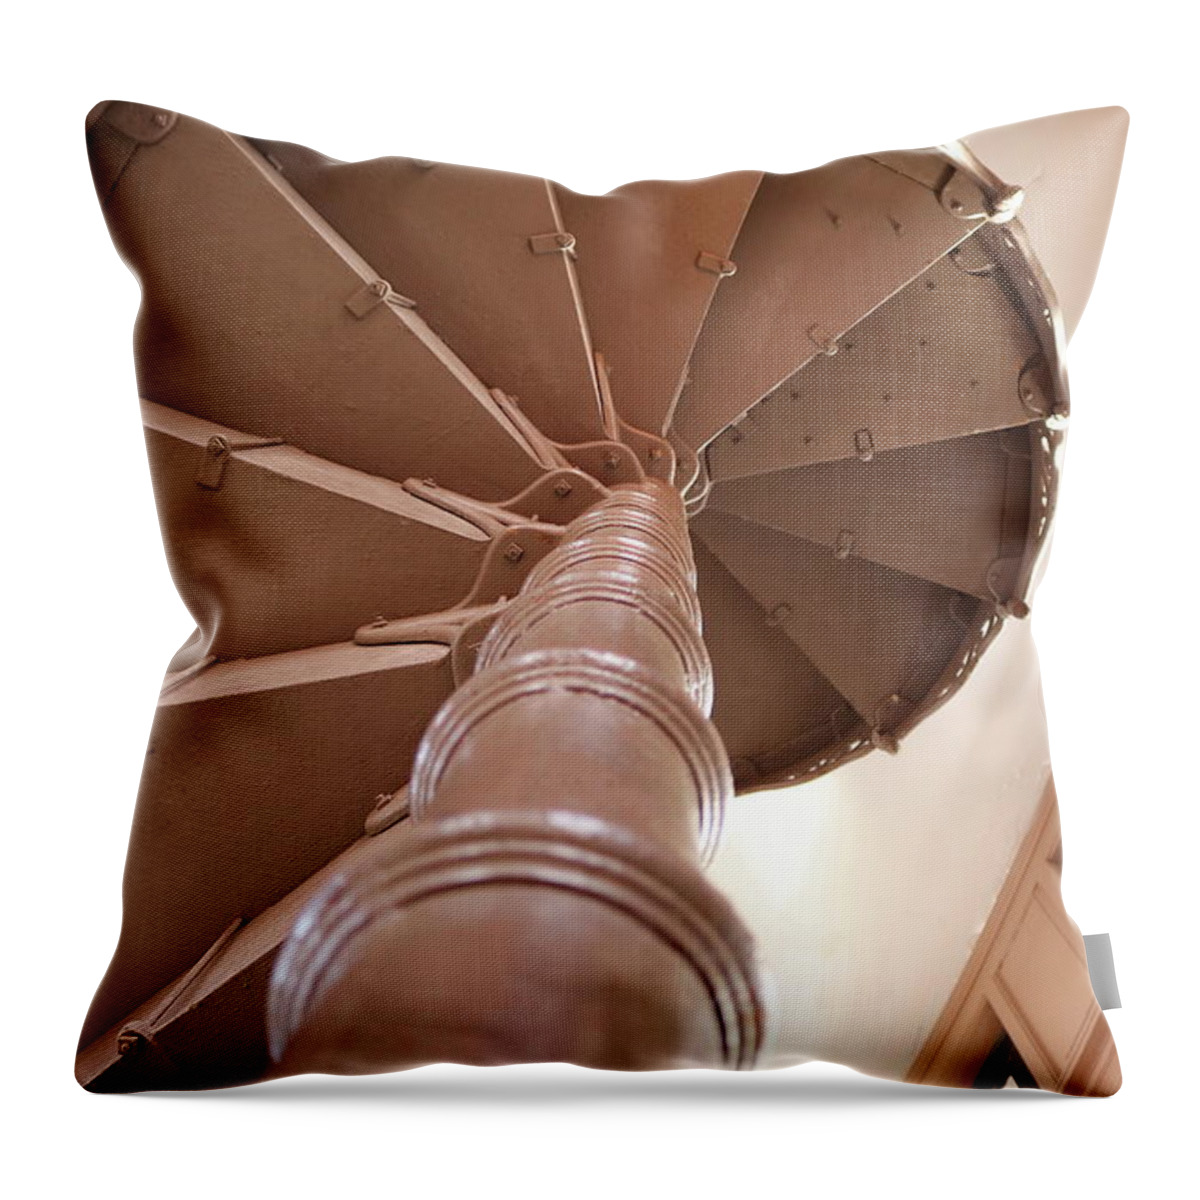  Bay Throw Pillow featuring the photograph Up the Stairs by Erick Schmidt